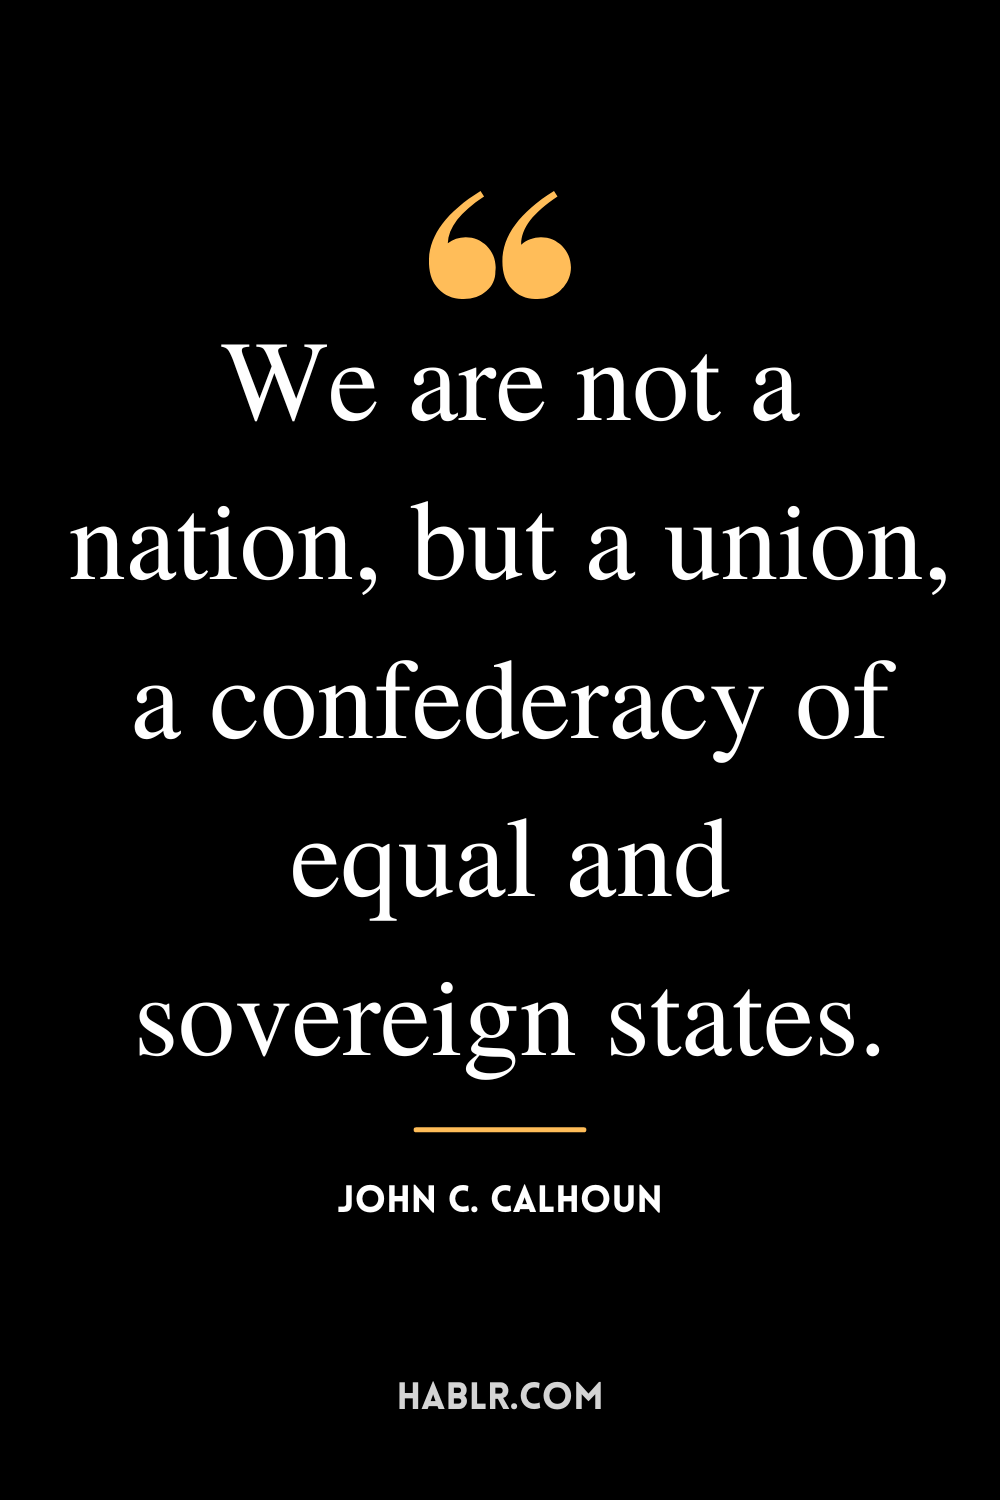 “We are not a nation, but a union, a confederacy of equal and sovereign states.” -John C. Calhoun